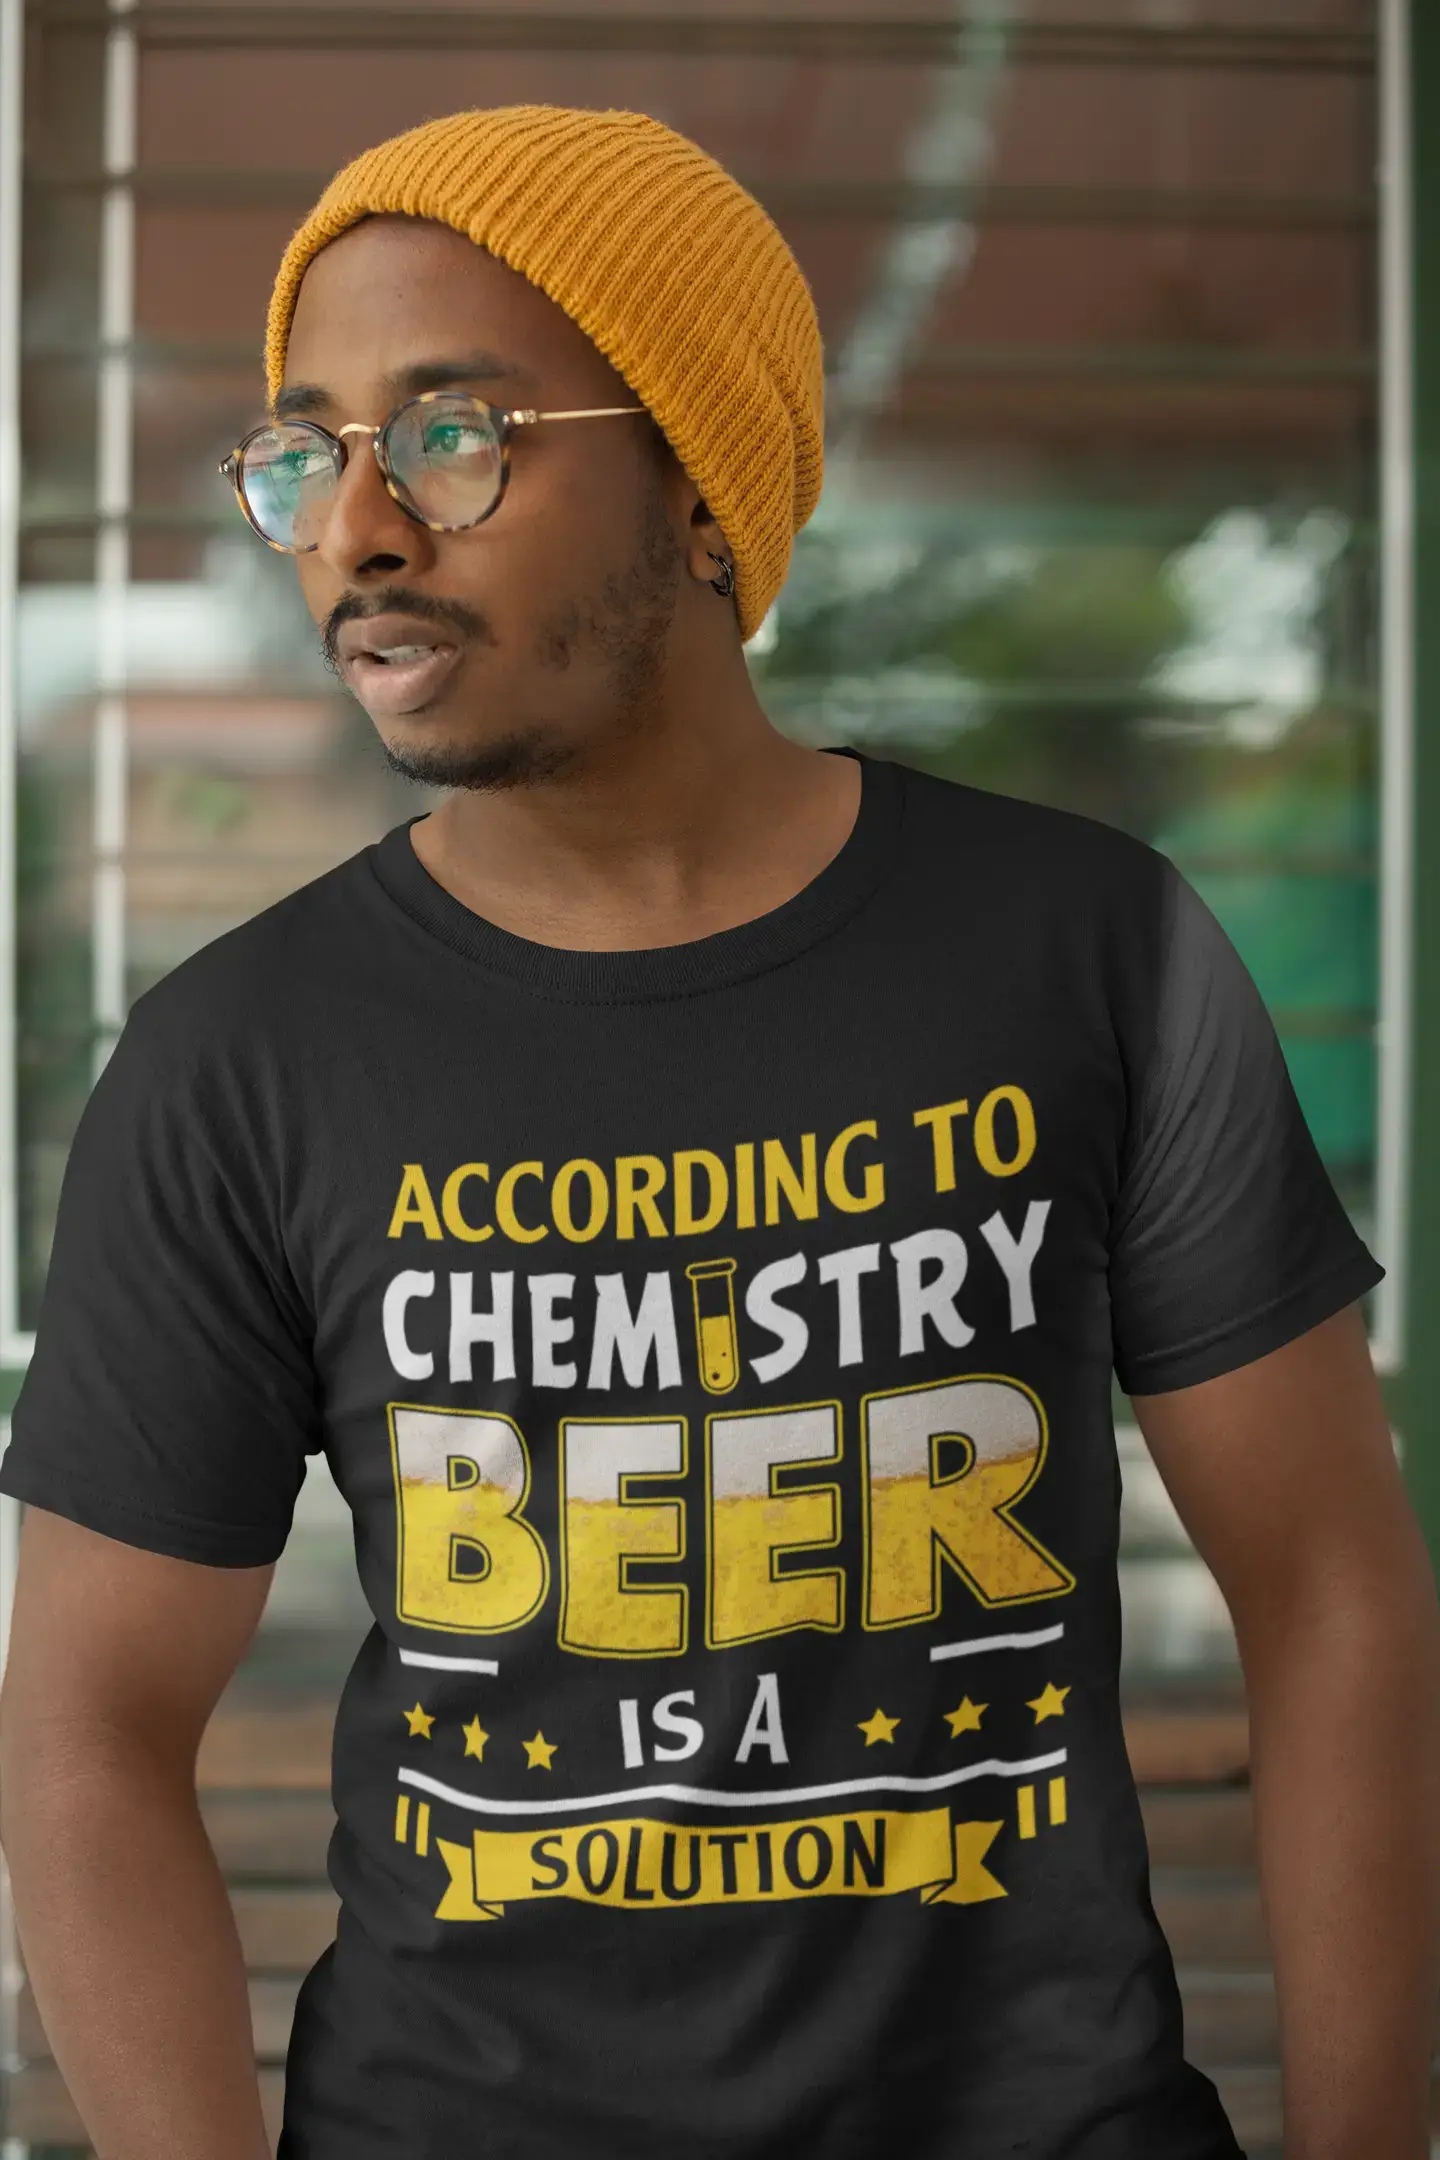 ULTRABASIC Men's T-Shirt According to Chemistry Beer is a Solution - Beer Lover Tee Shirt